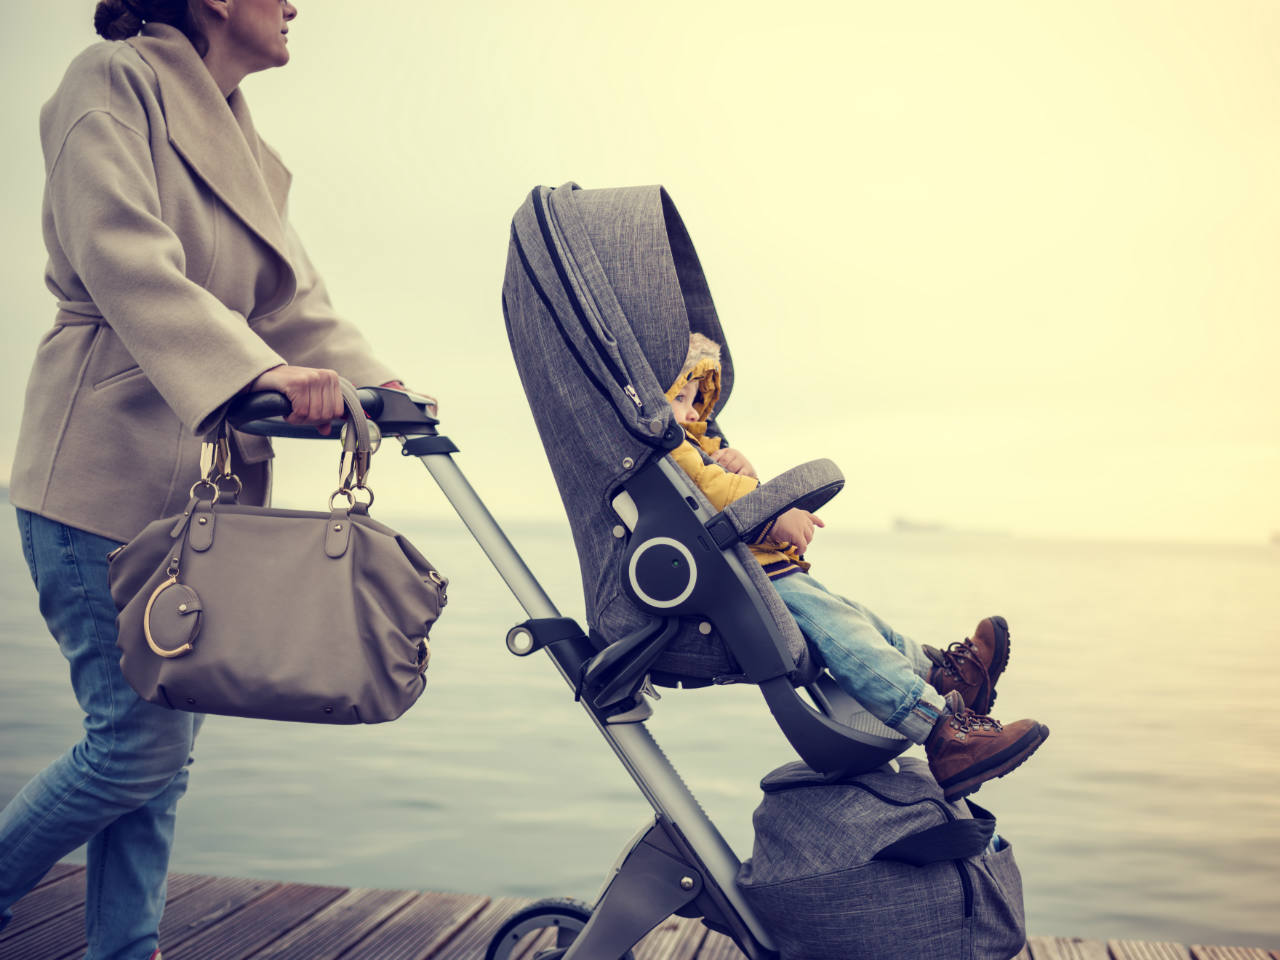 what to look for in a baby stroller